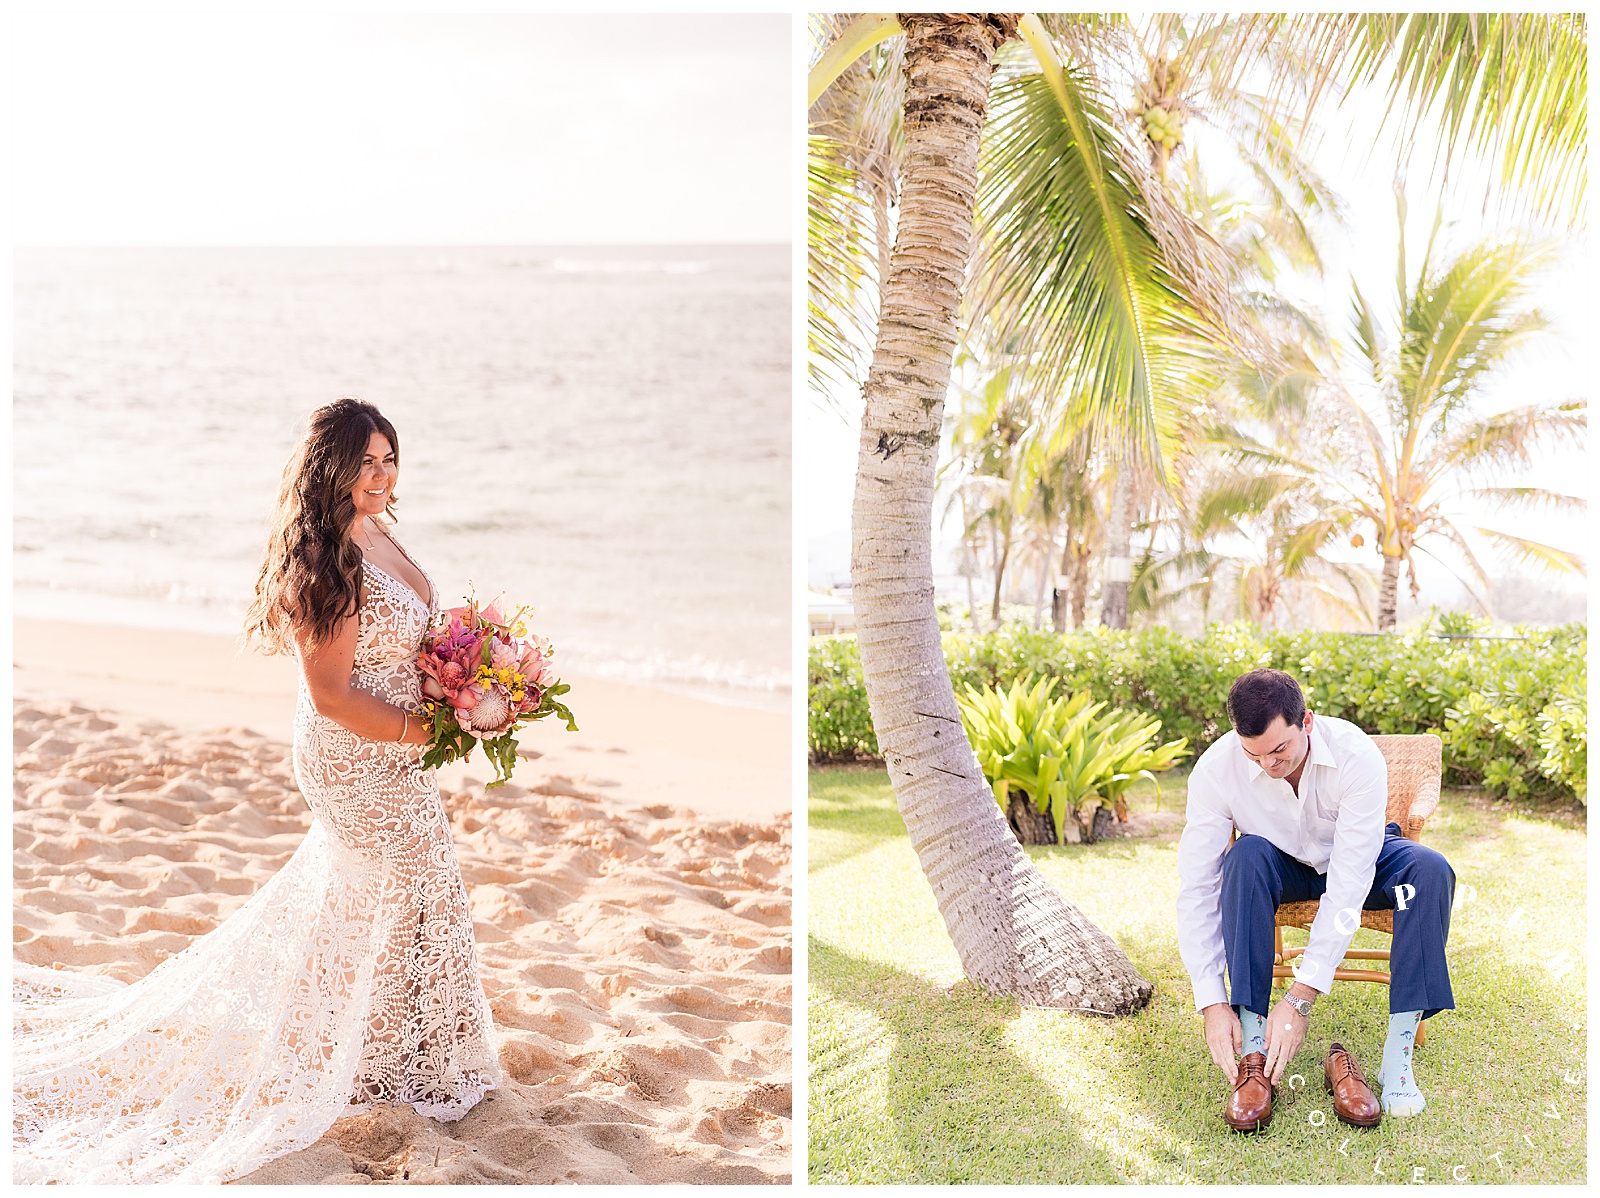 A bride and groom getting ready for their wedding on Oahu's North Shore